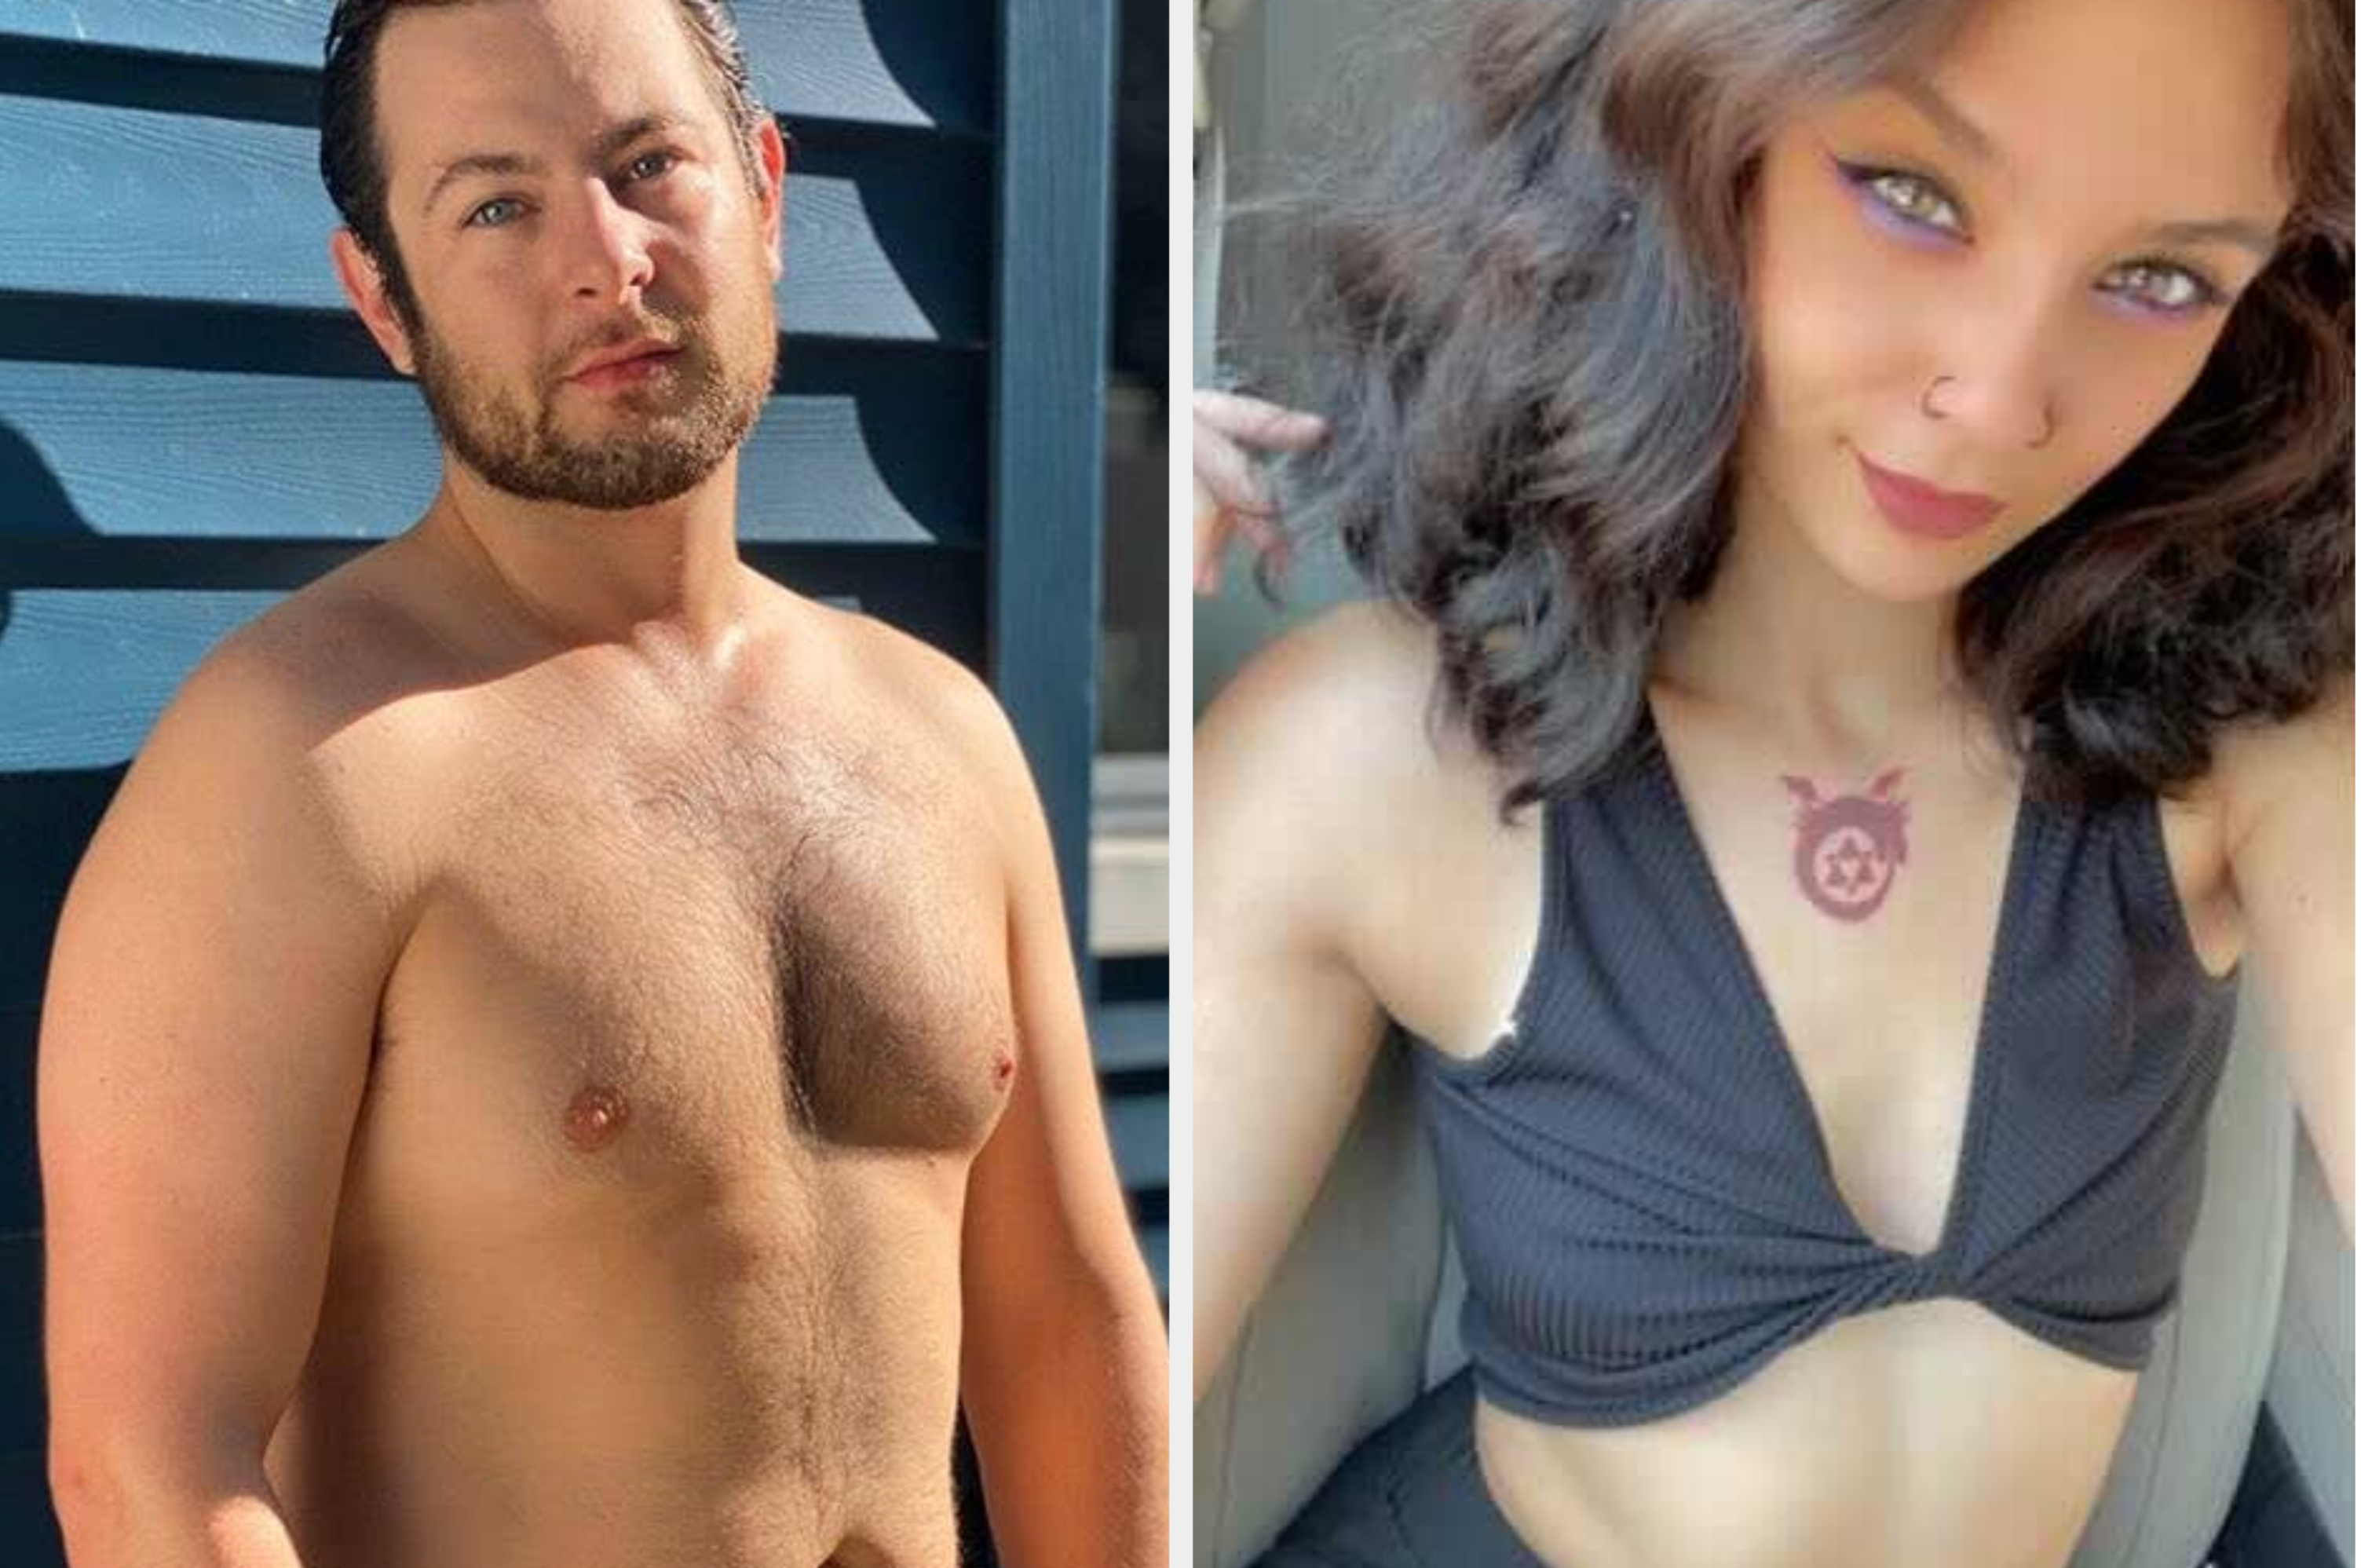 Transexuals Before And After - OnlyFans Creators React To Sexually Explicit Content Ban